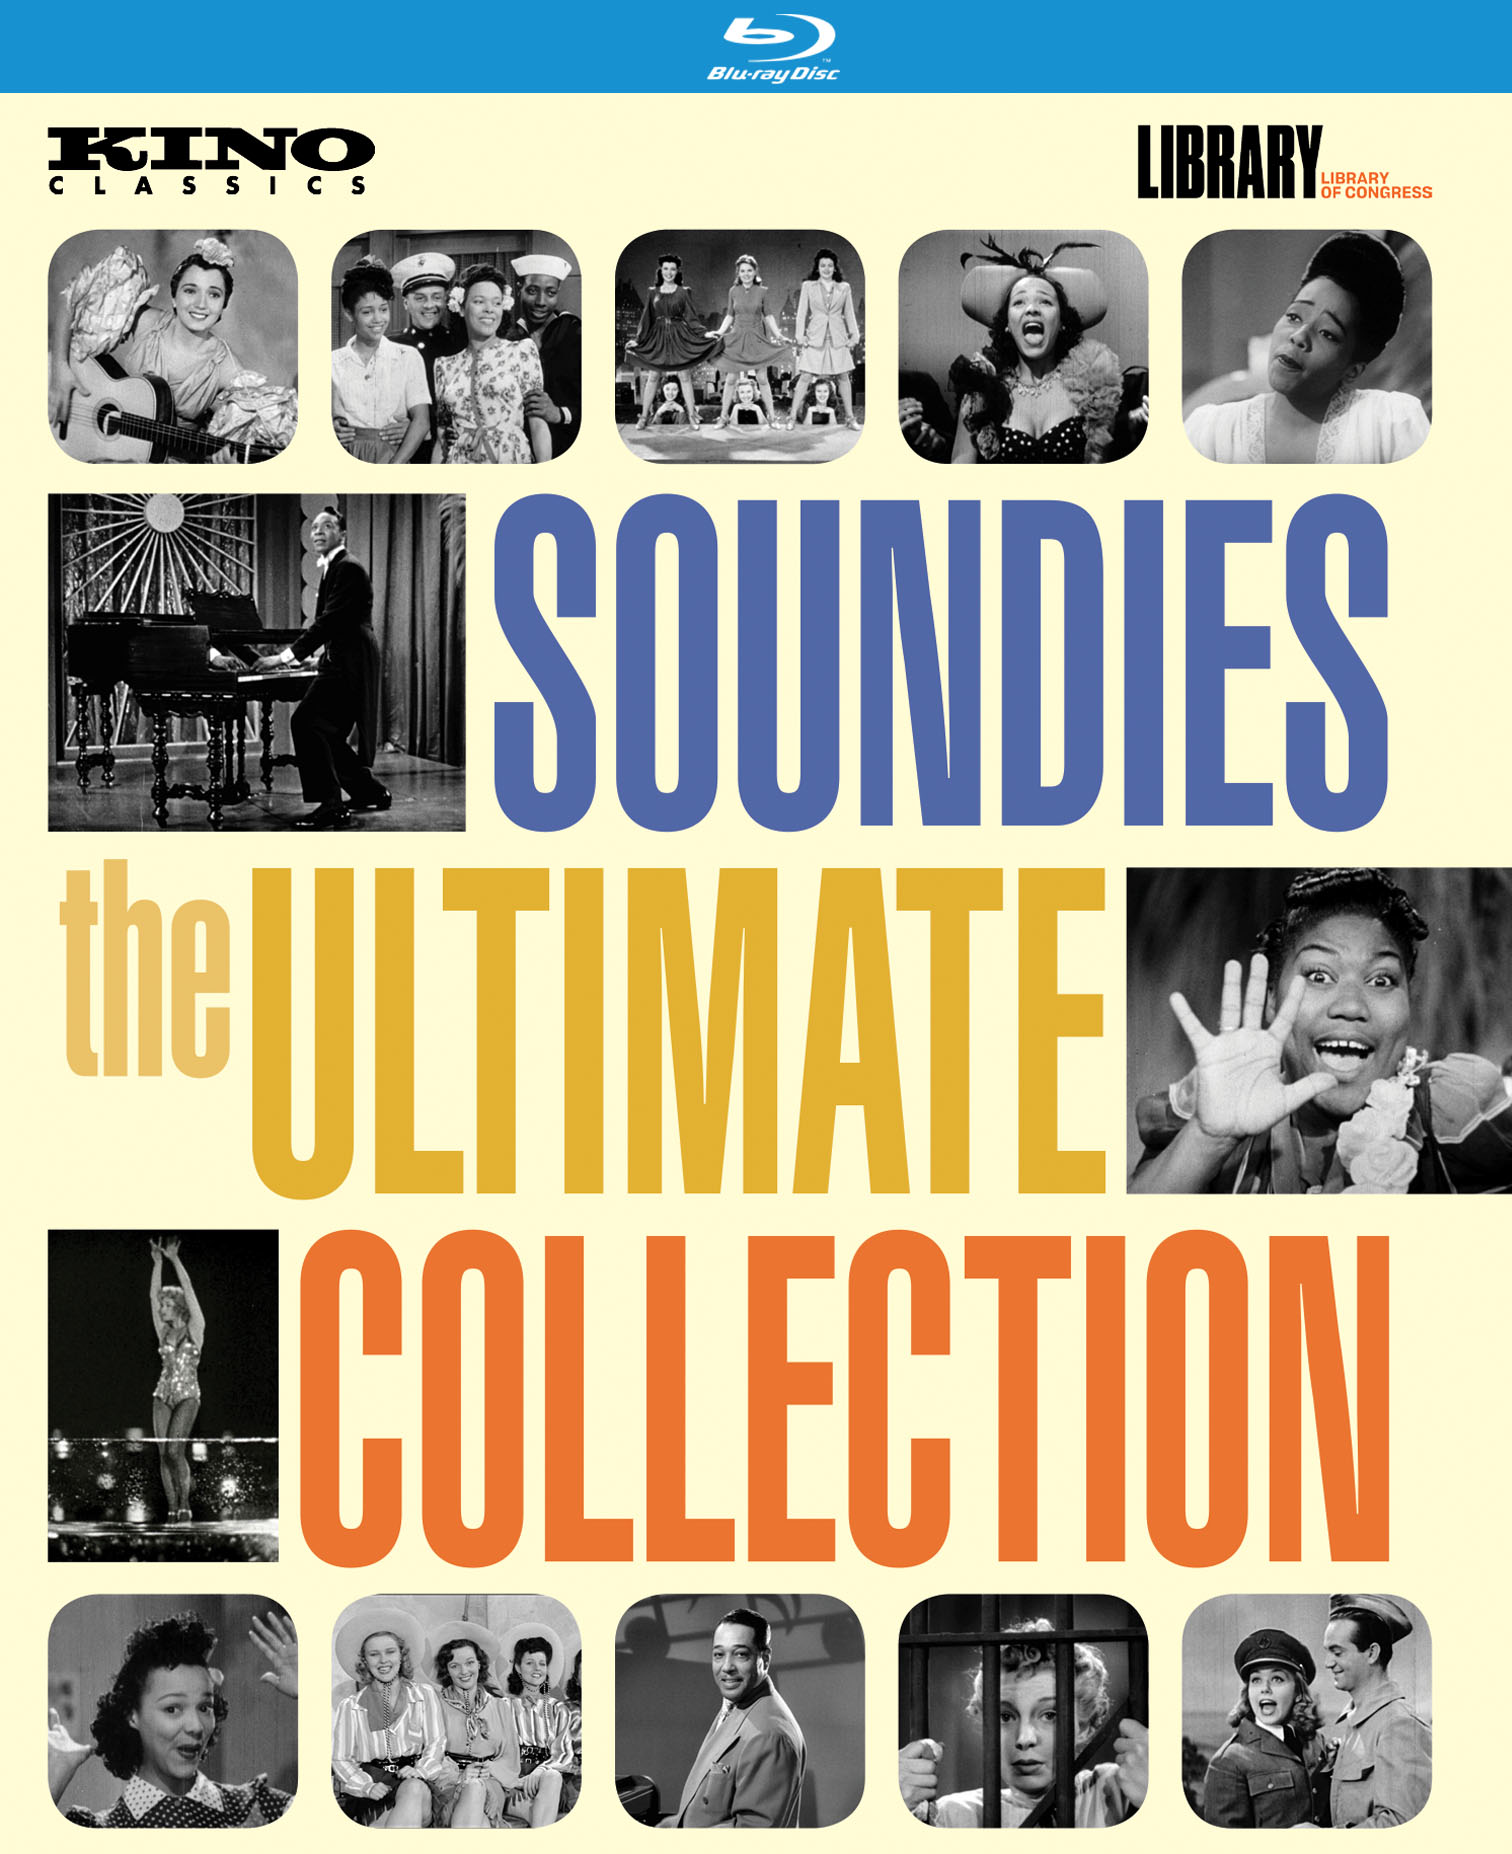 Cover image for "Soundies the Ultimate Collection," coming soon from Kino Lorber